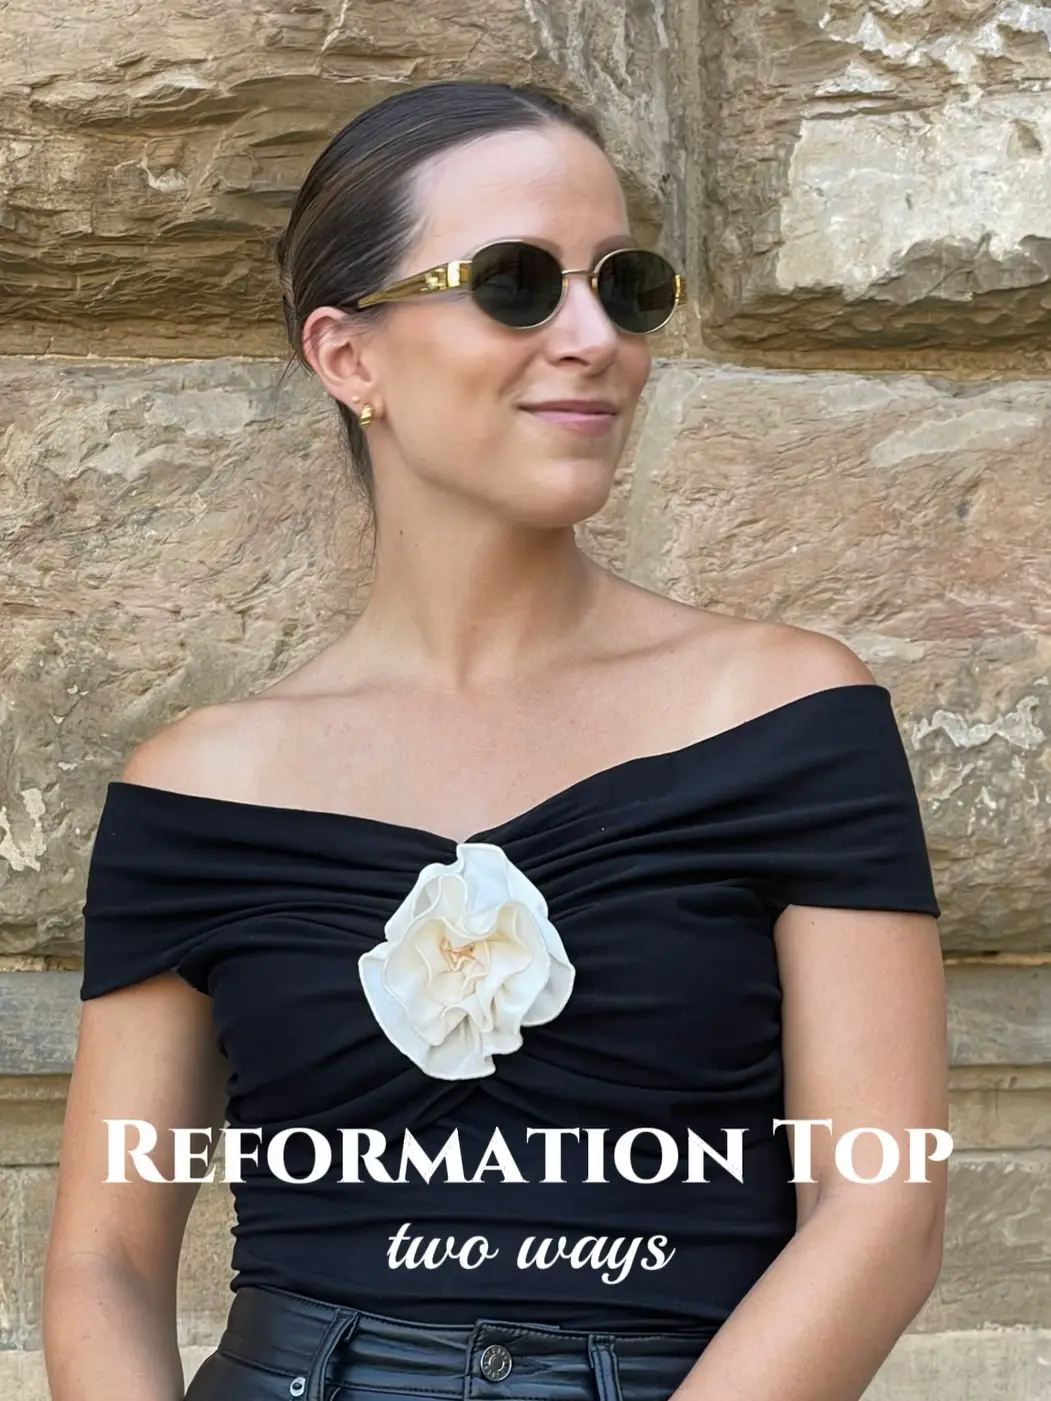 Reformation Top Two Ways | Gallery posted by erika schatz | Lemon8